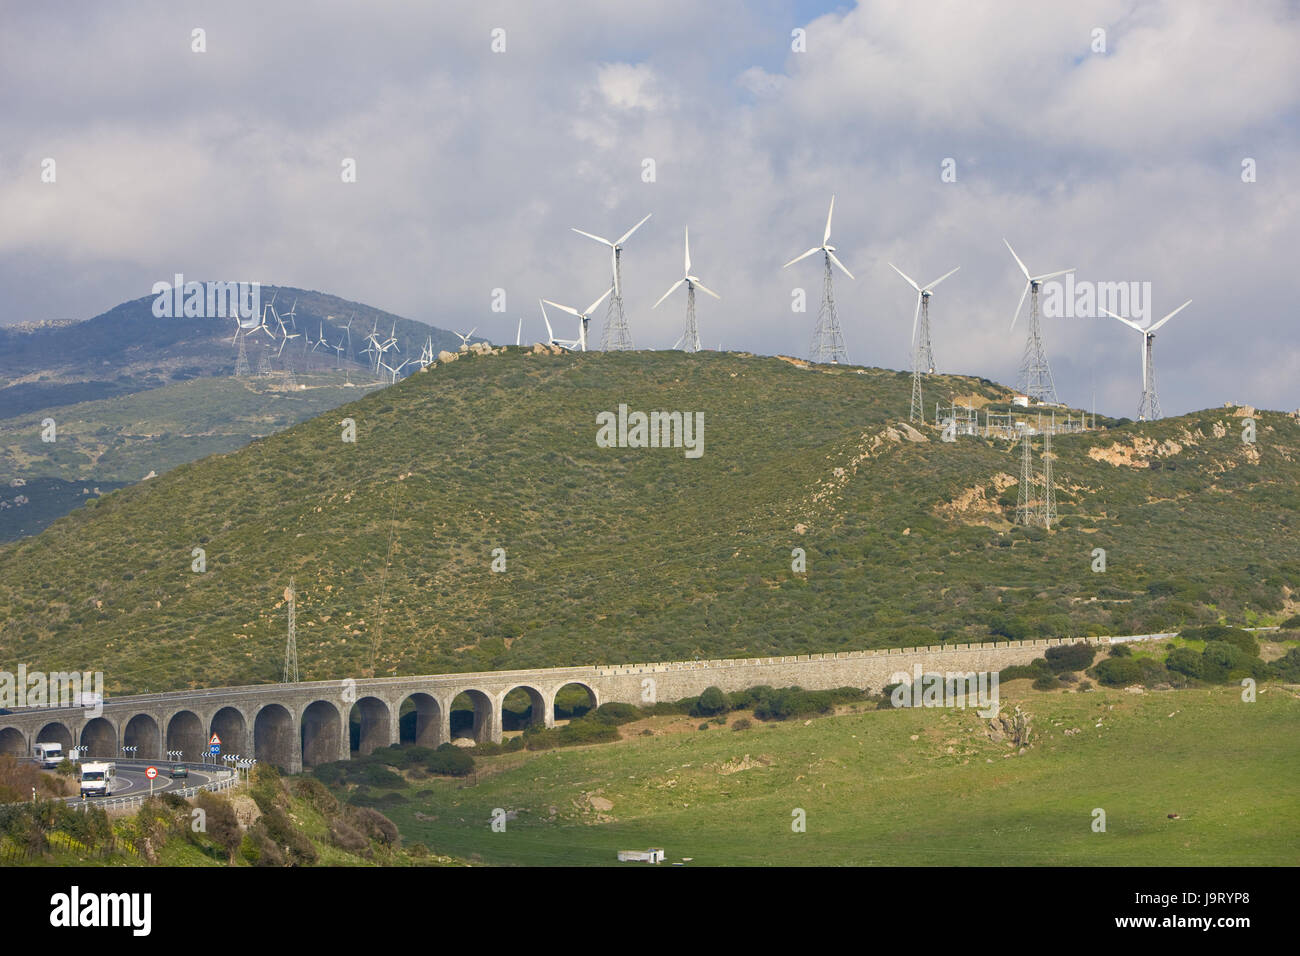 Spain,Andalusia,wind power station,bridge,scenery, Stock Photo